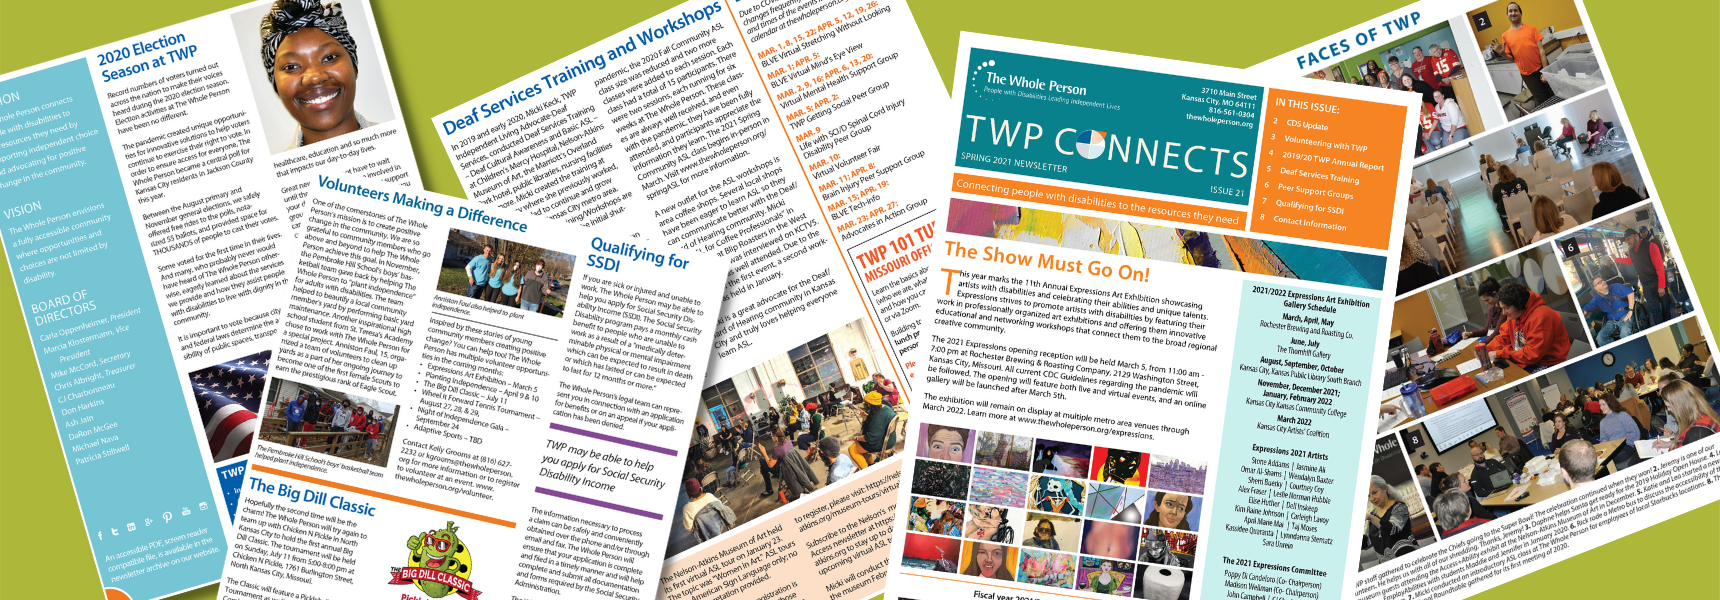 Photo collage of pages from newsletters